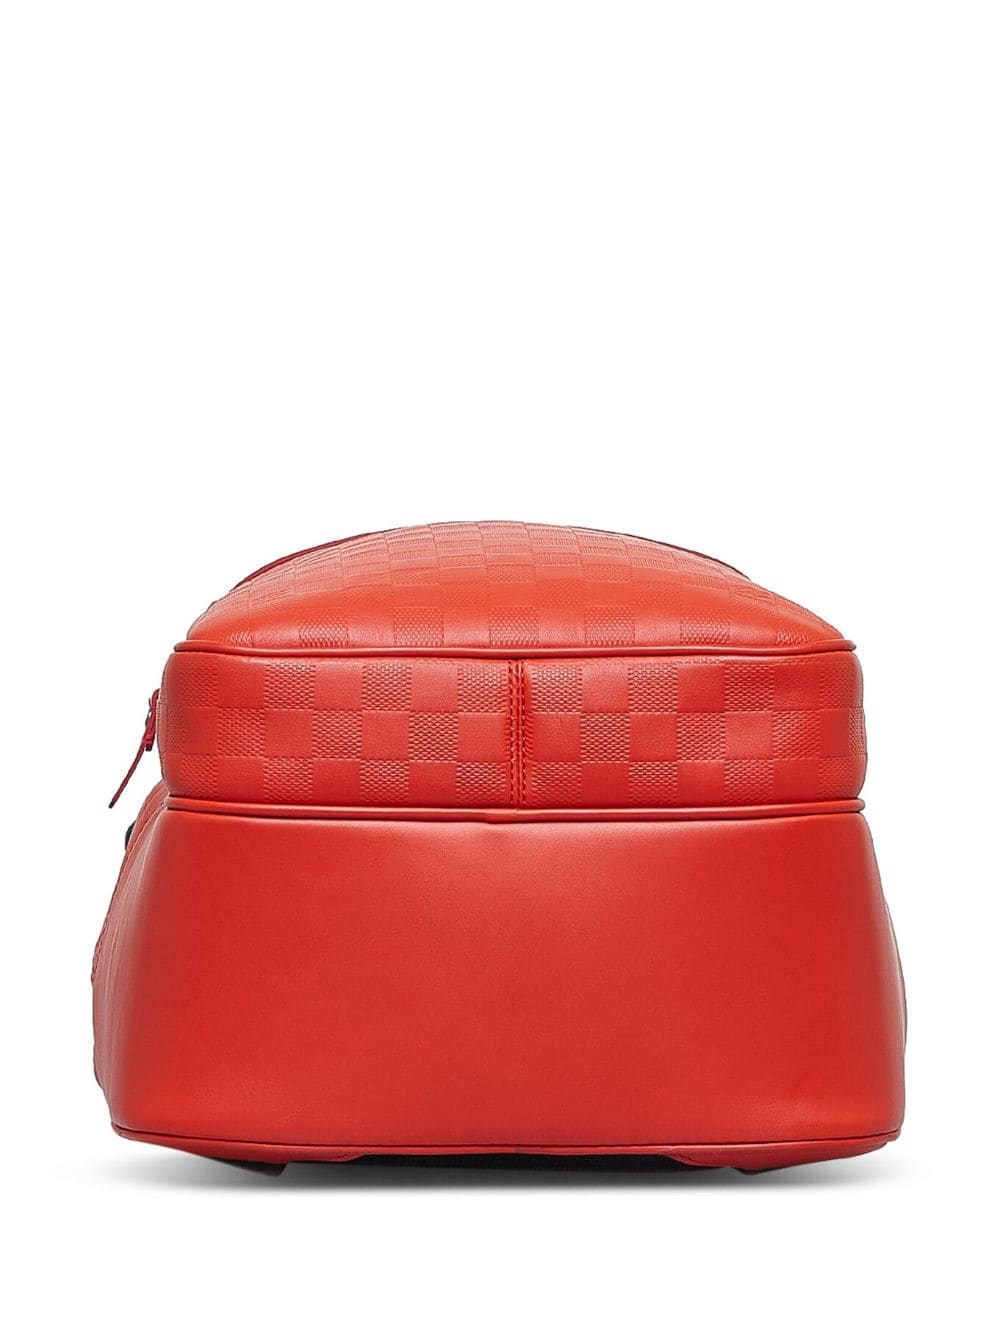 louis vuitton red backpack